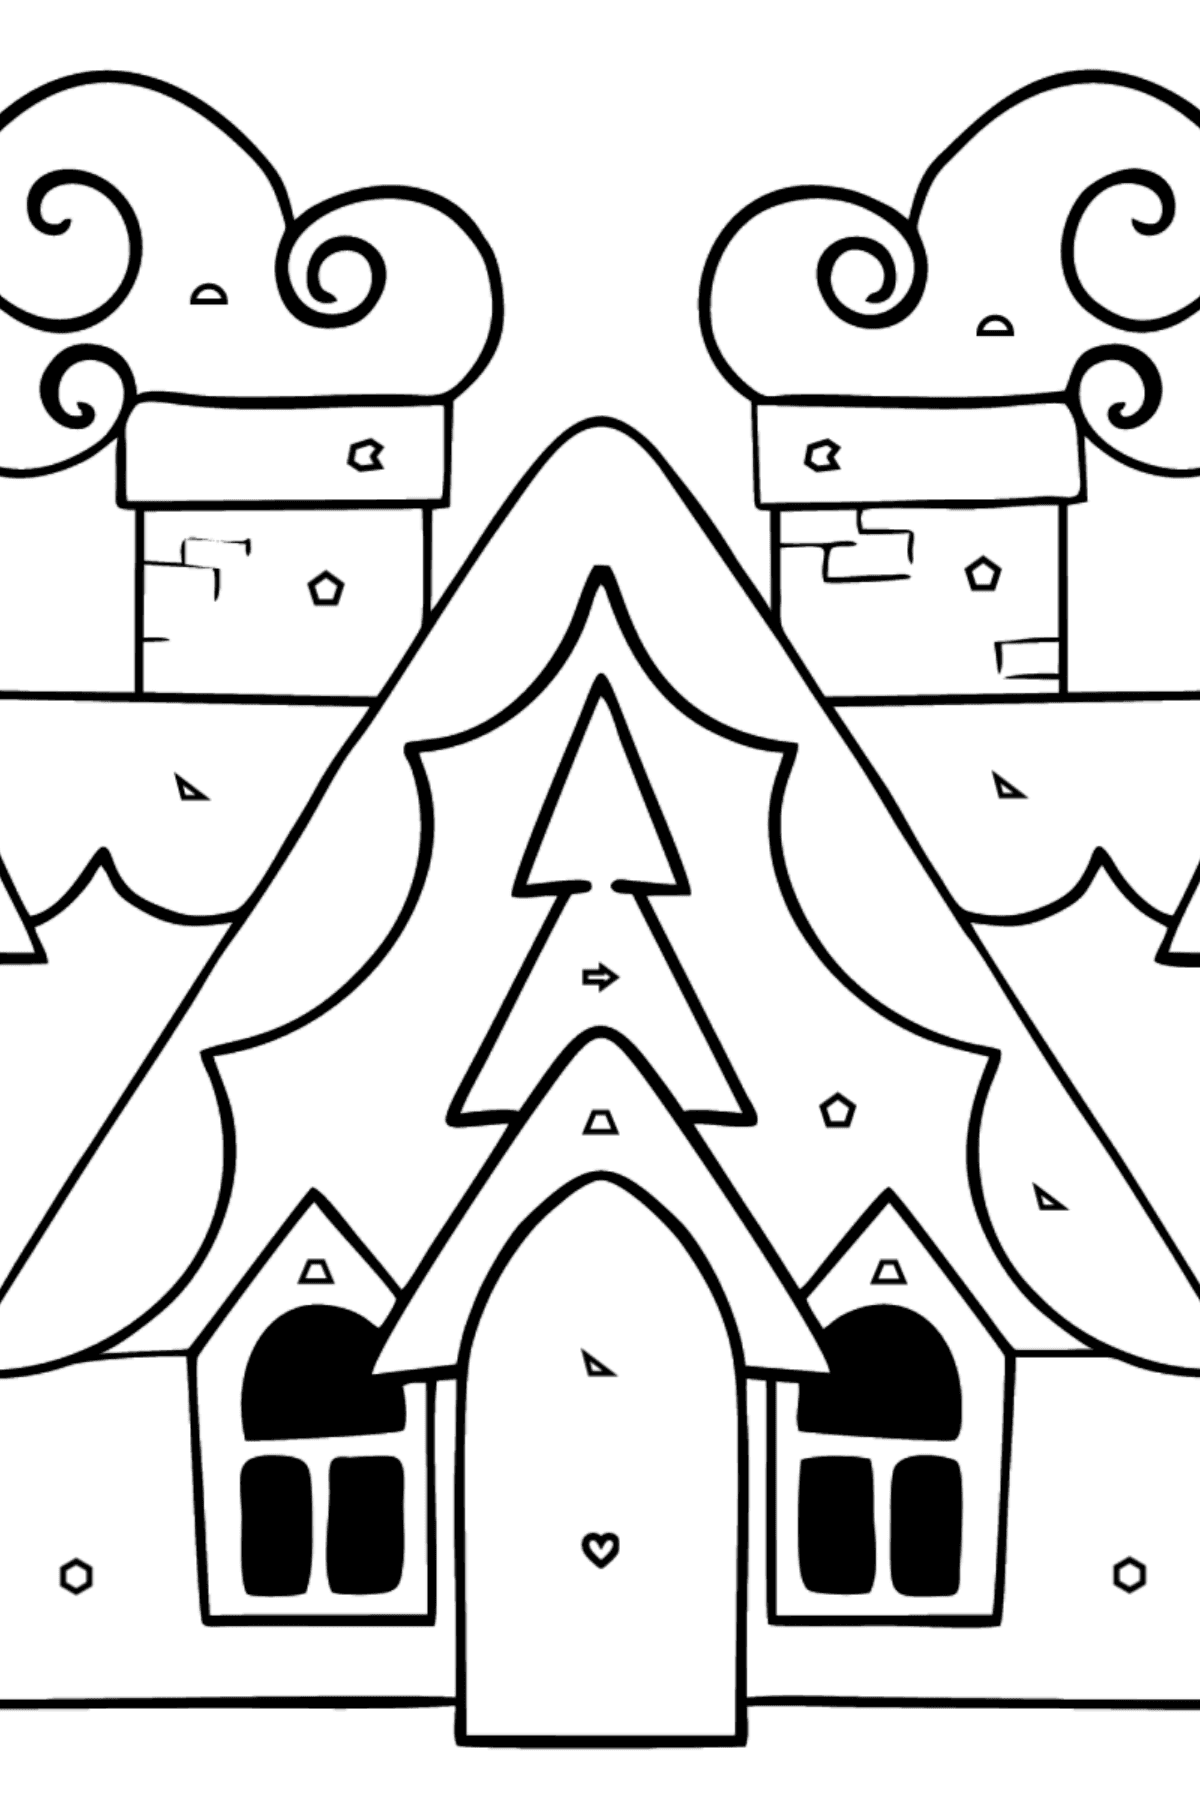 Complex Coloring Page - A Magic House - Coloring by Geometric Shapes for Kids